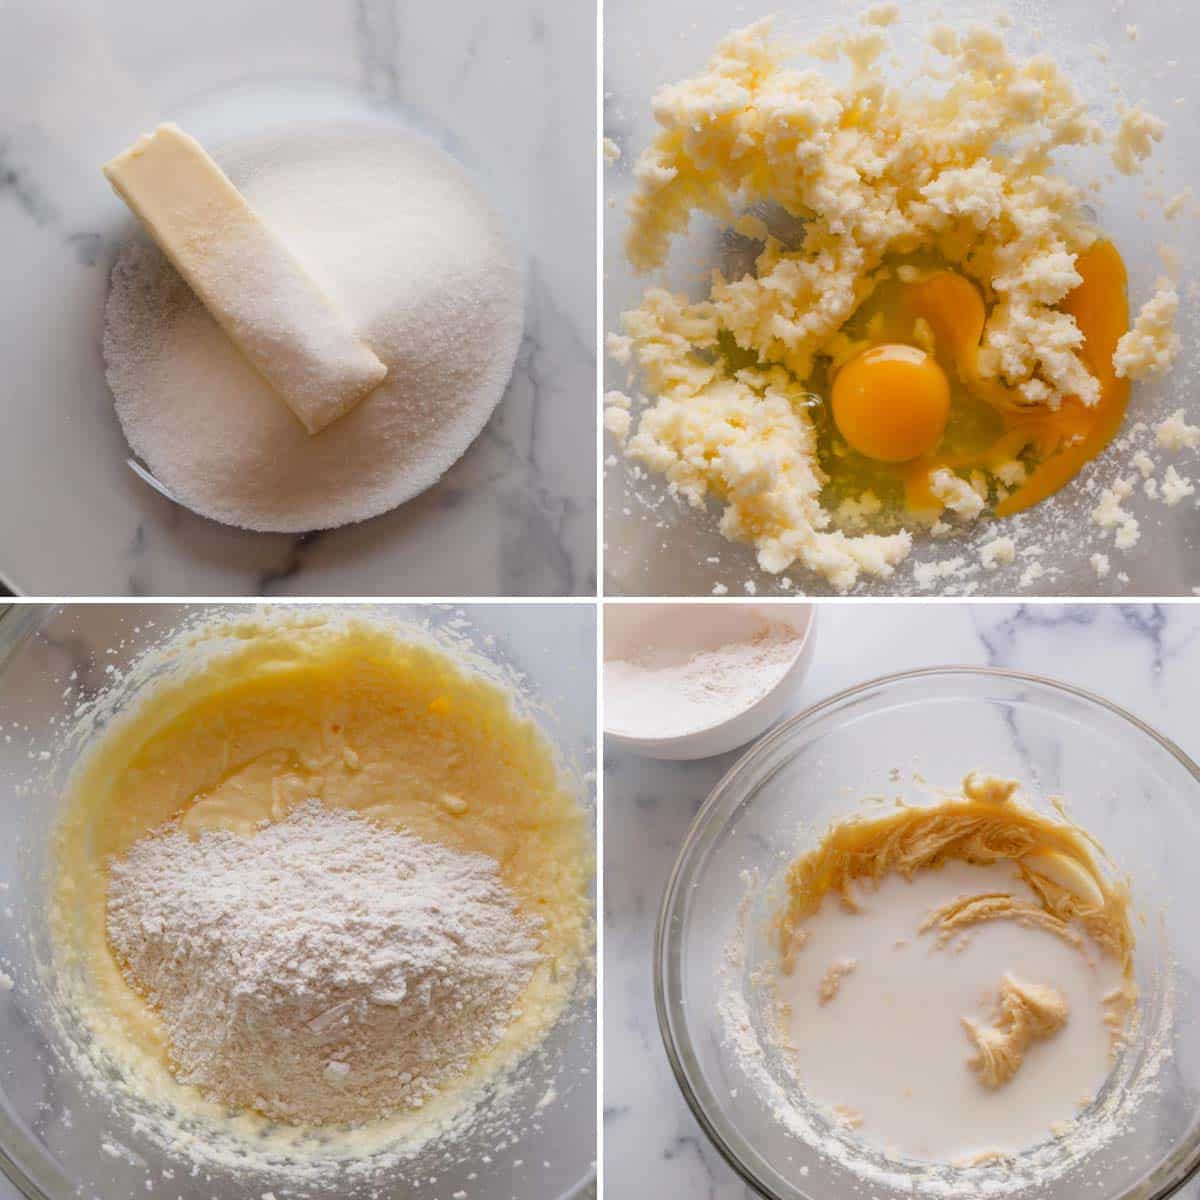 Step by step photos of making muffin batter.